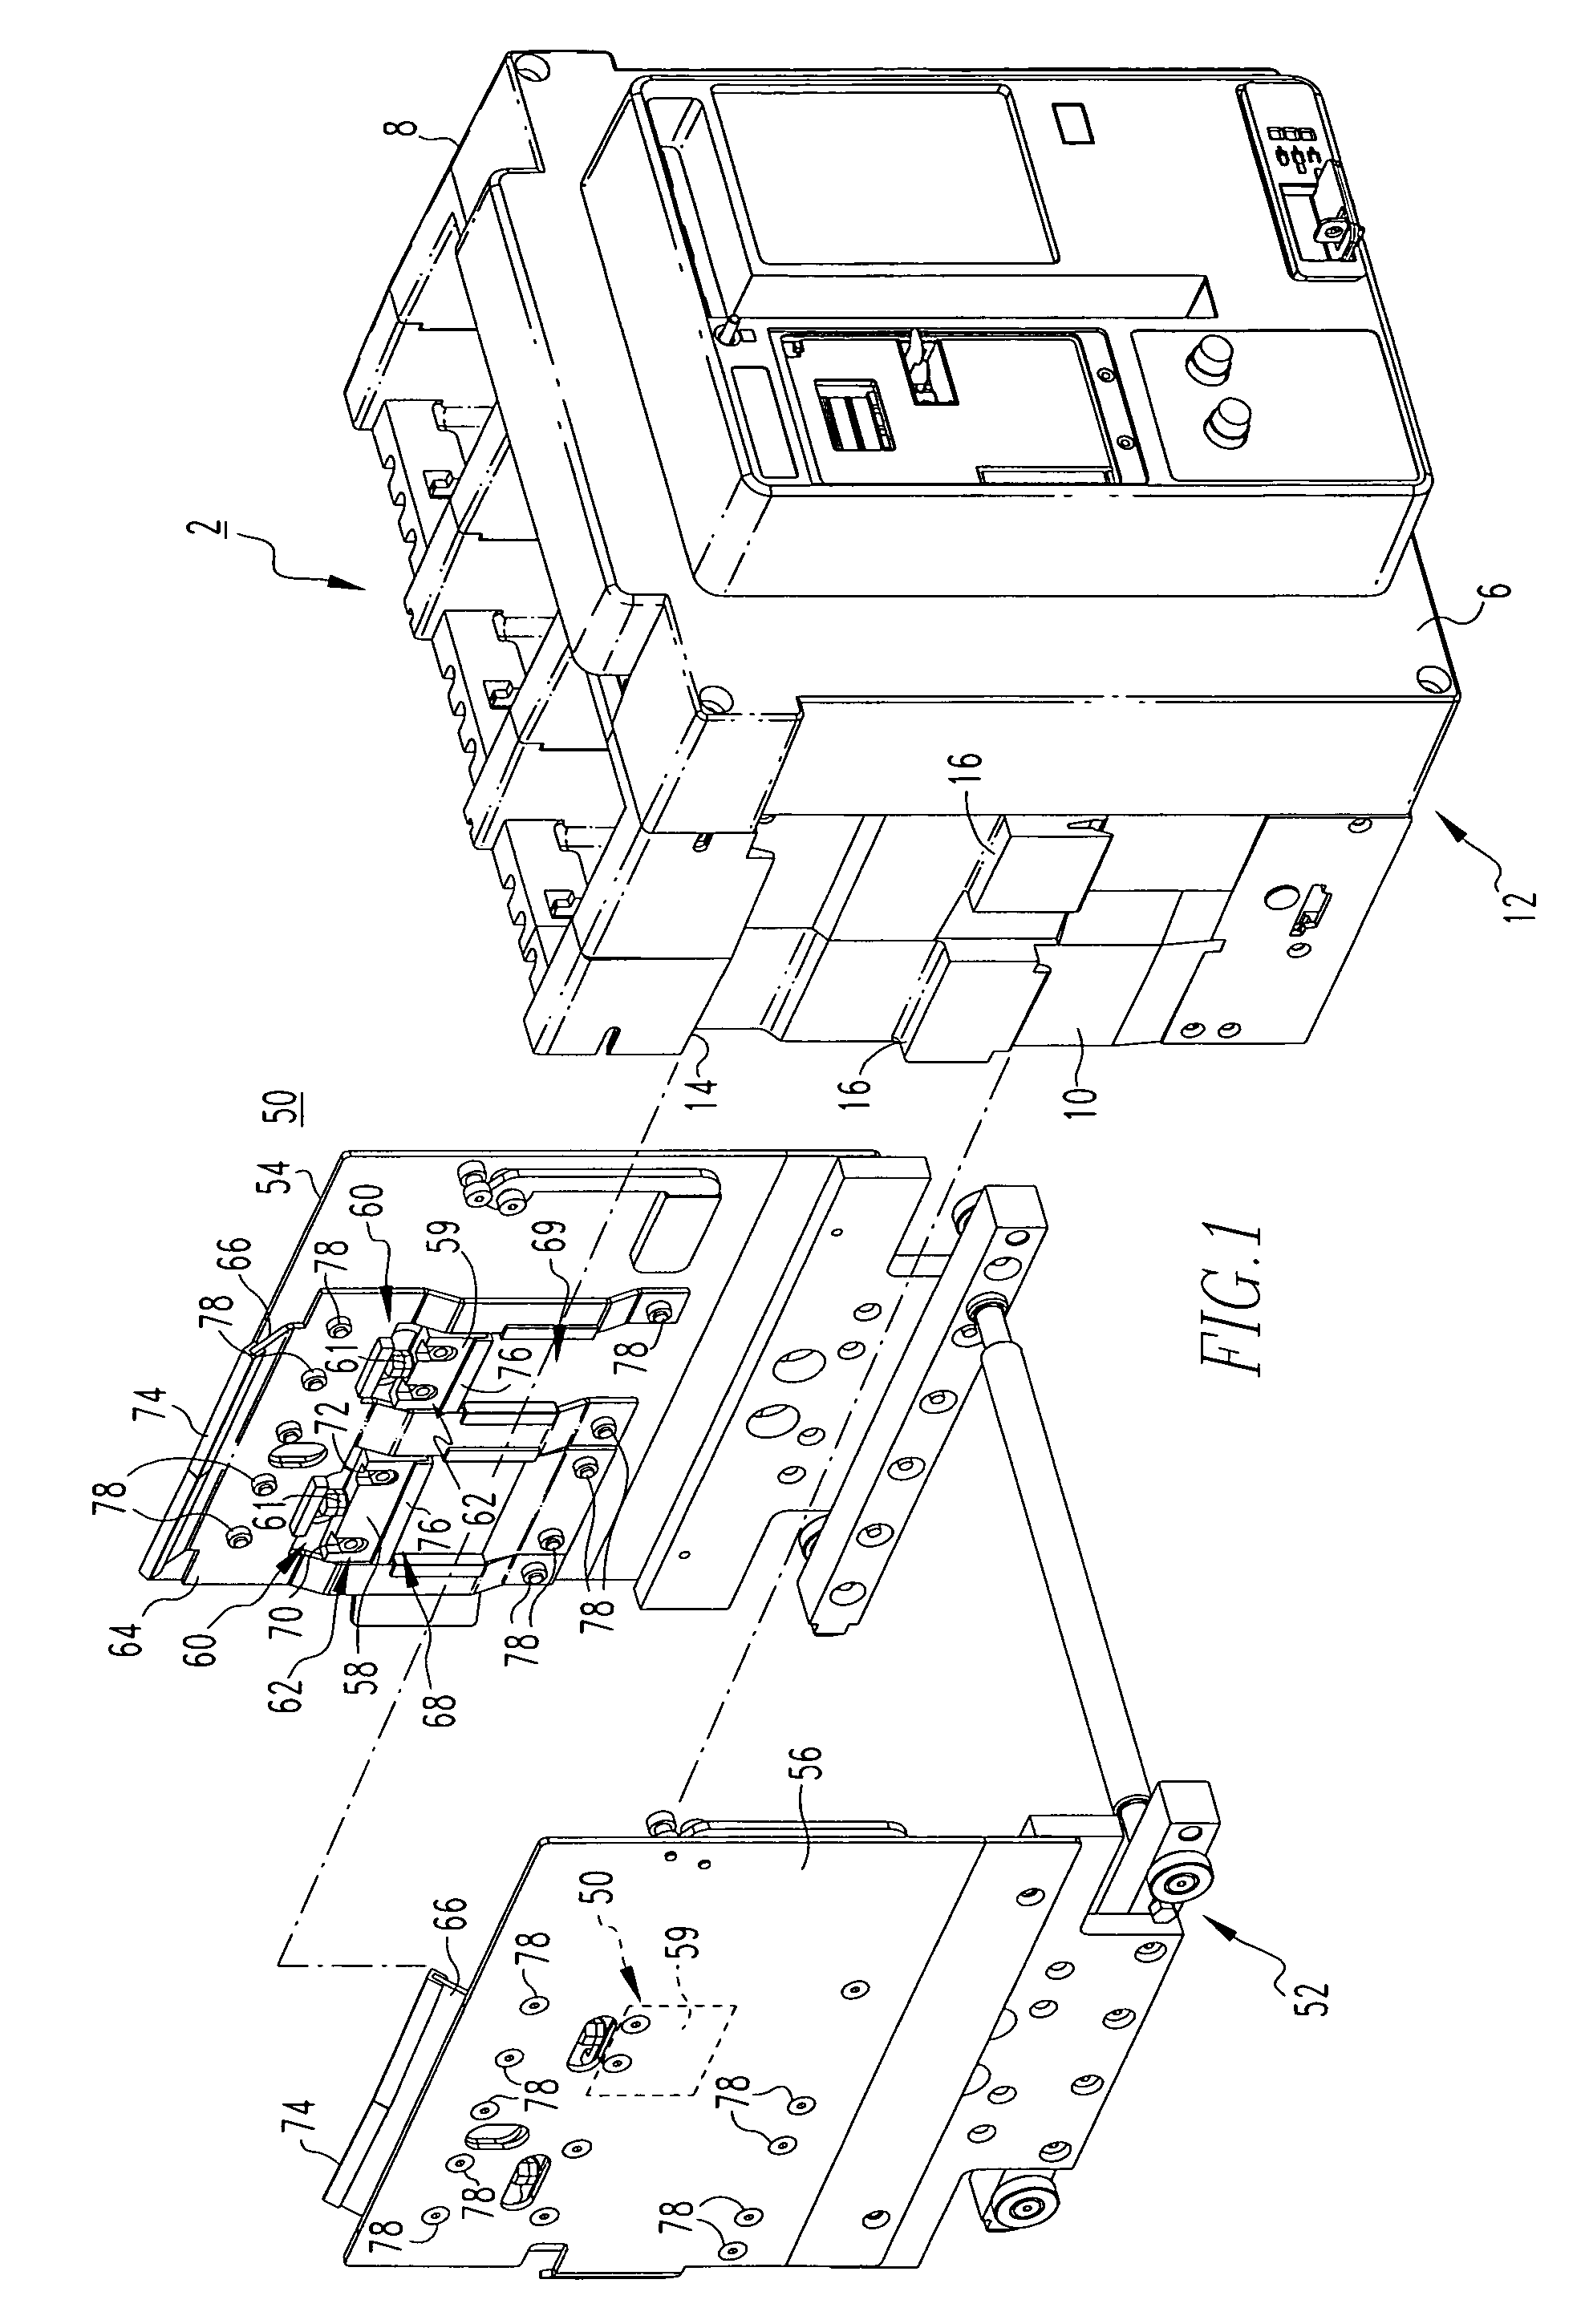 Electrical switching apparatus and adjustable mounting assembly therefor